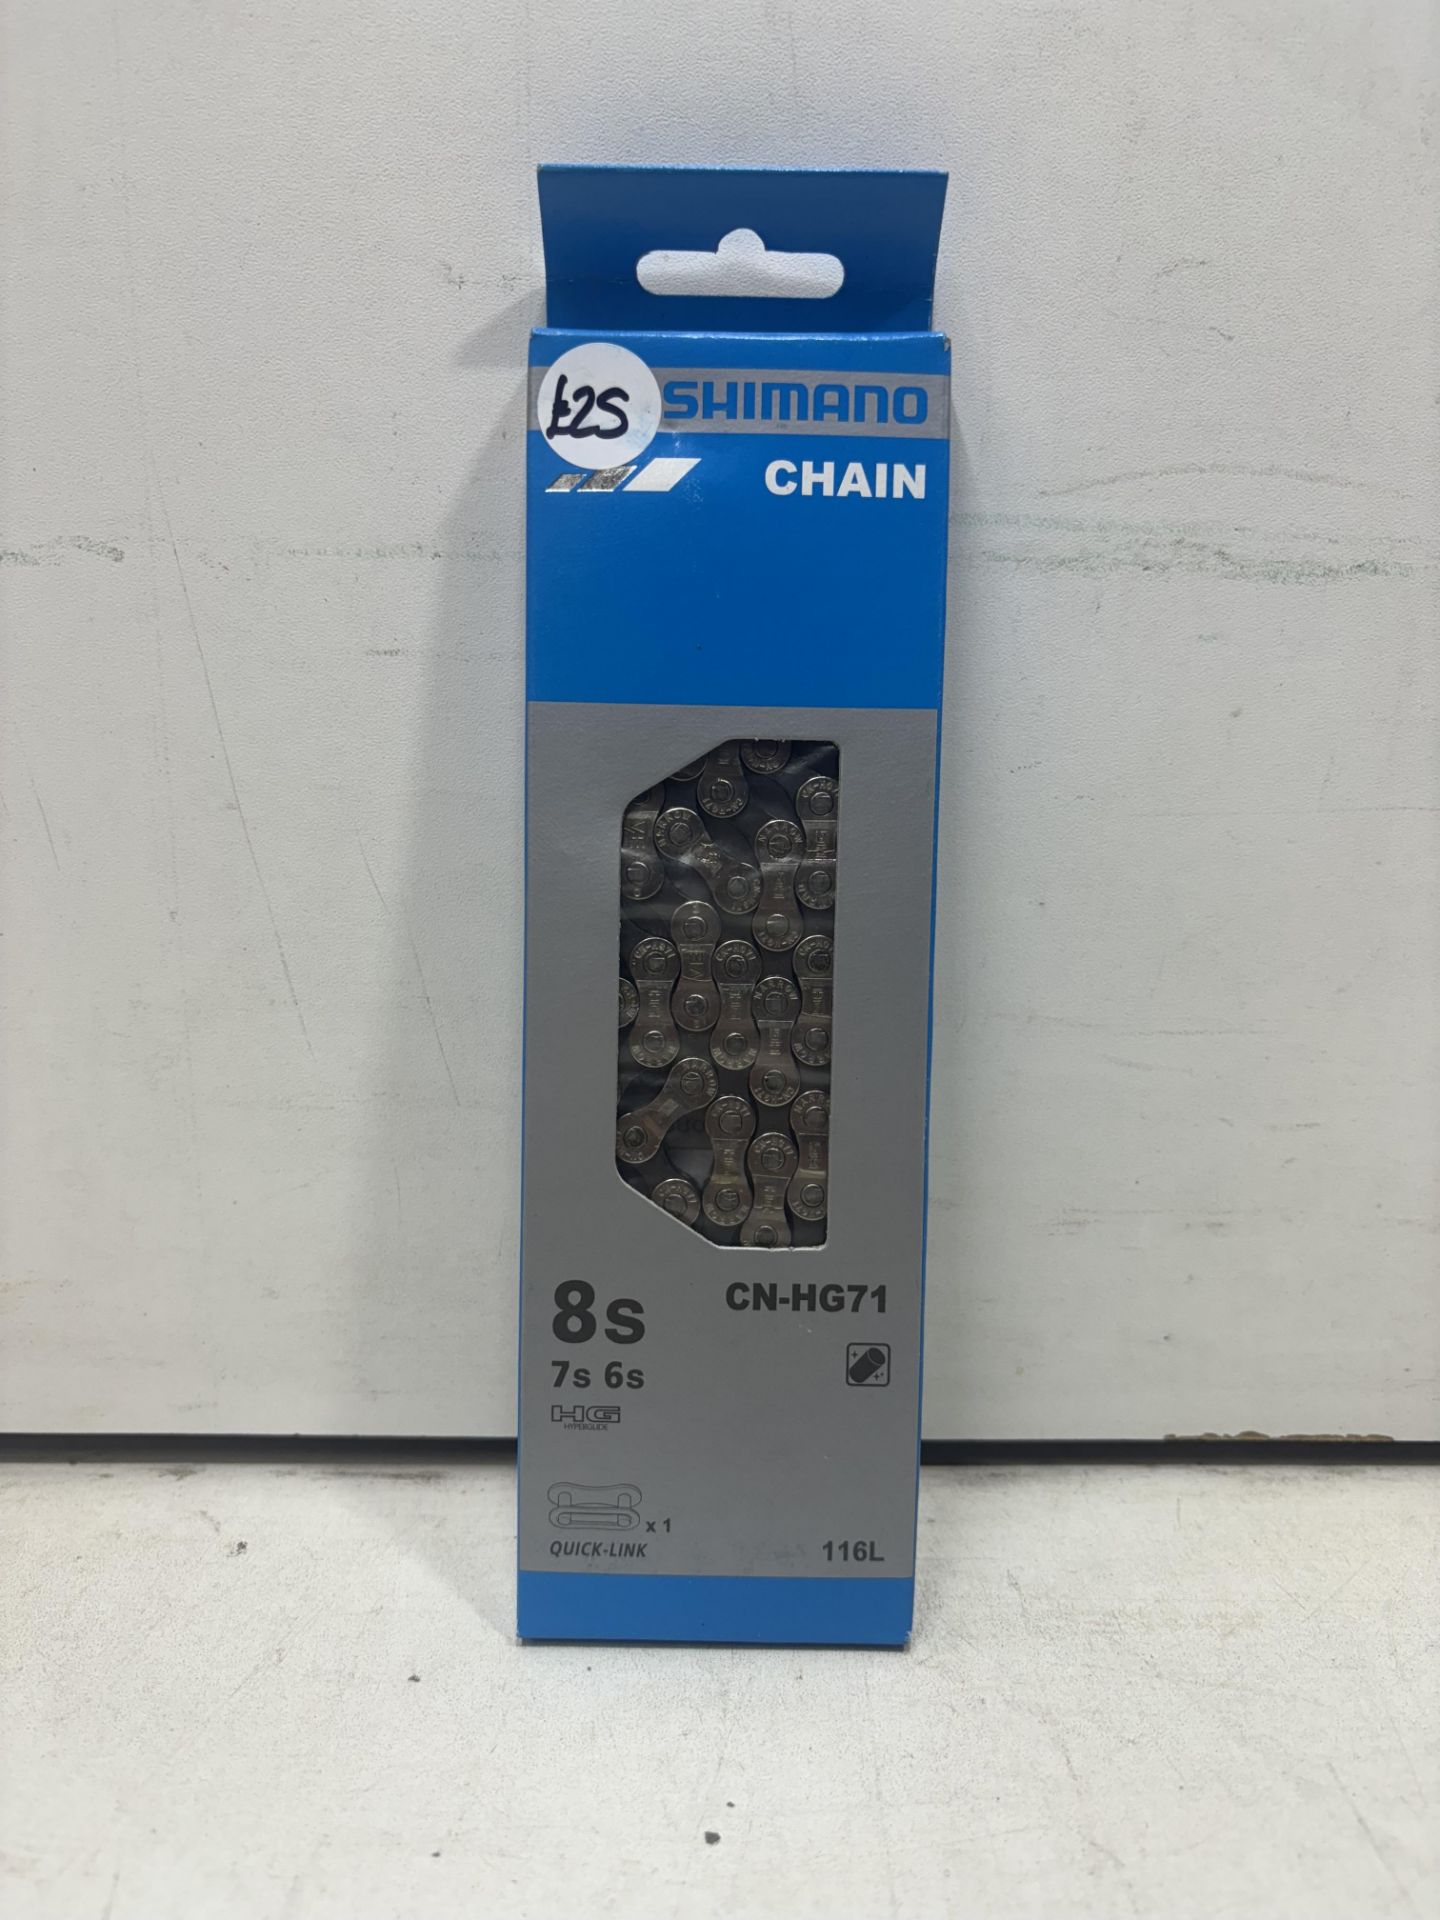 4 x Shimano CN-HG71 Chains - 6, 7, 8-Speed, 116 Links - Image 4 of 4